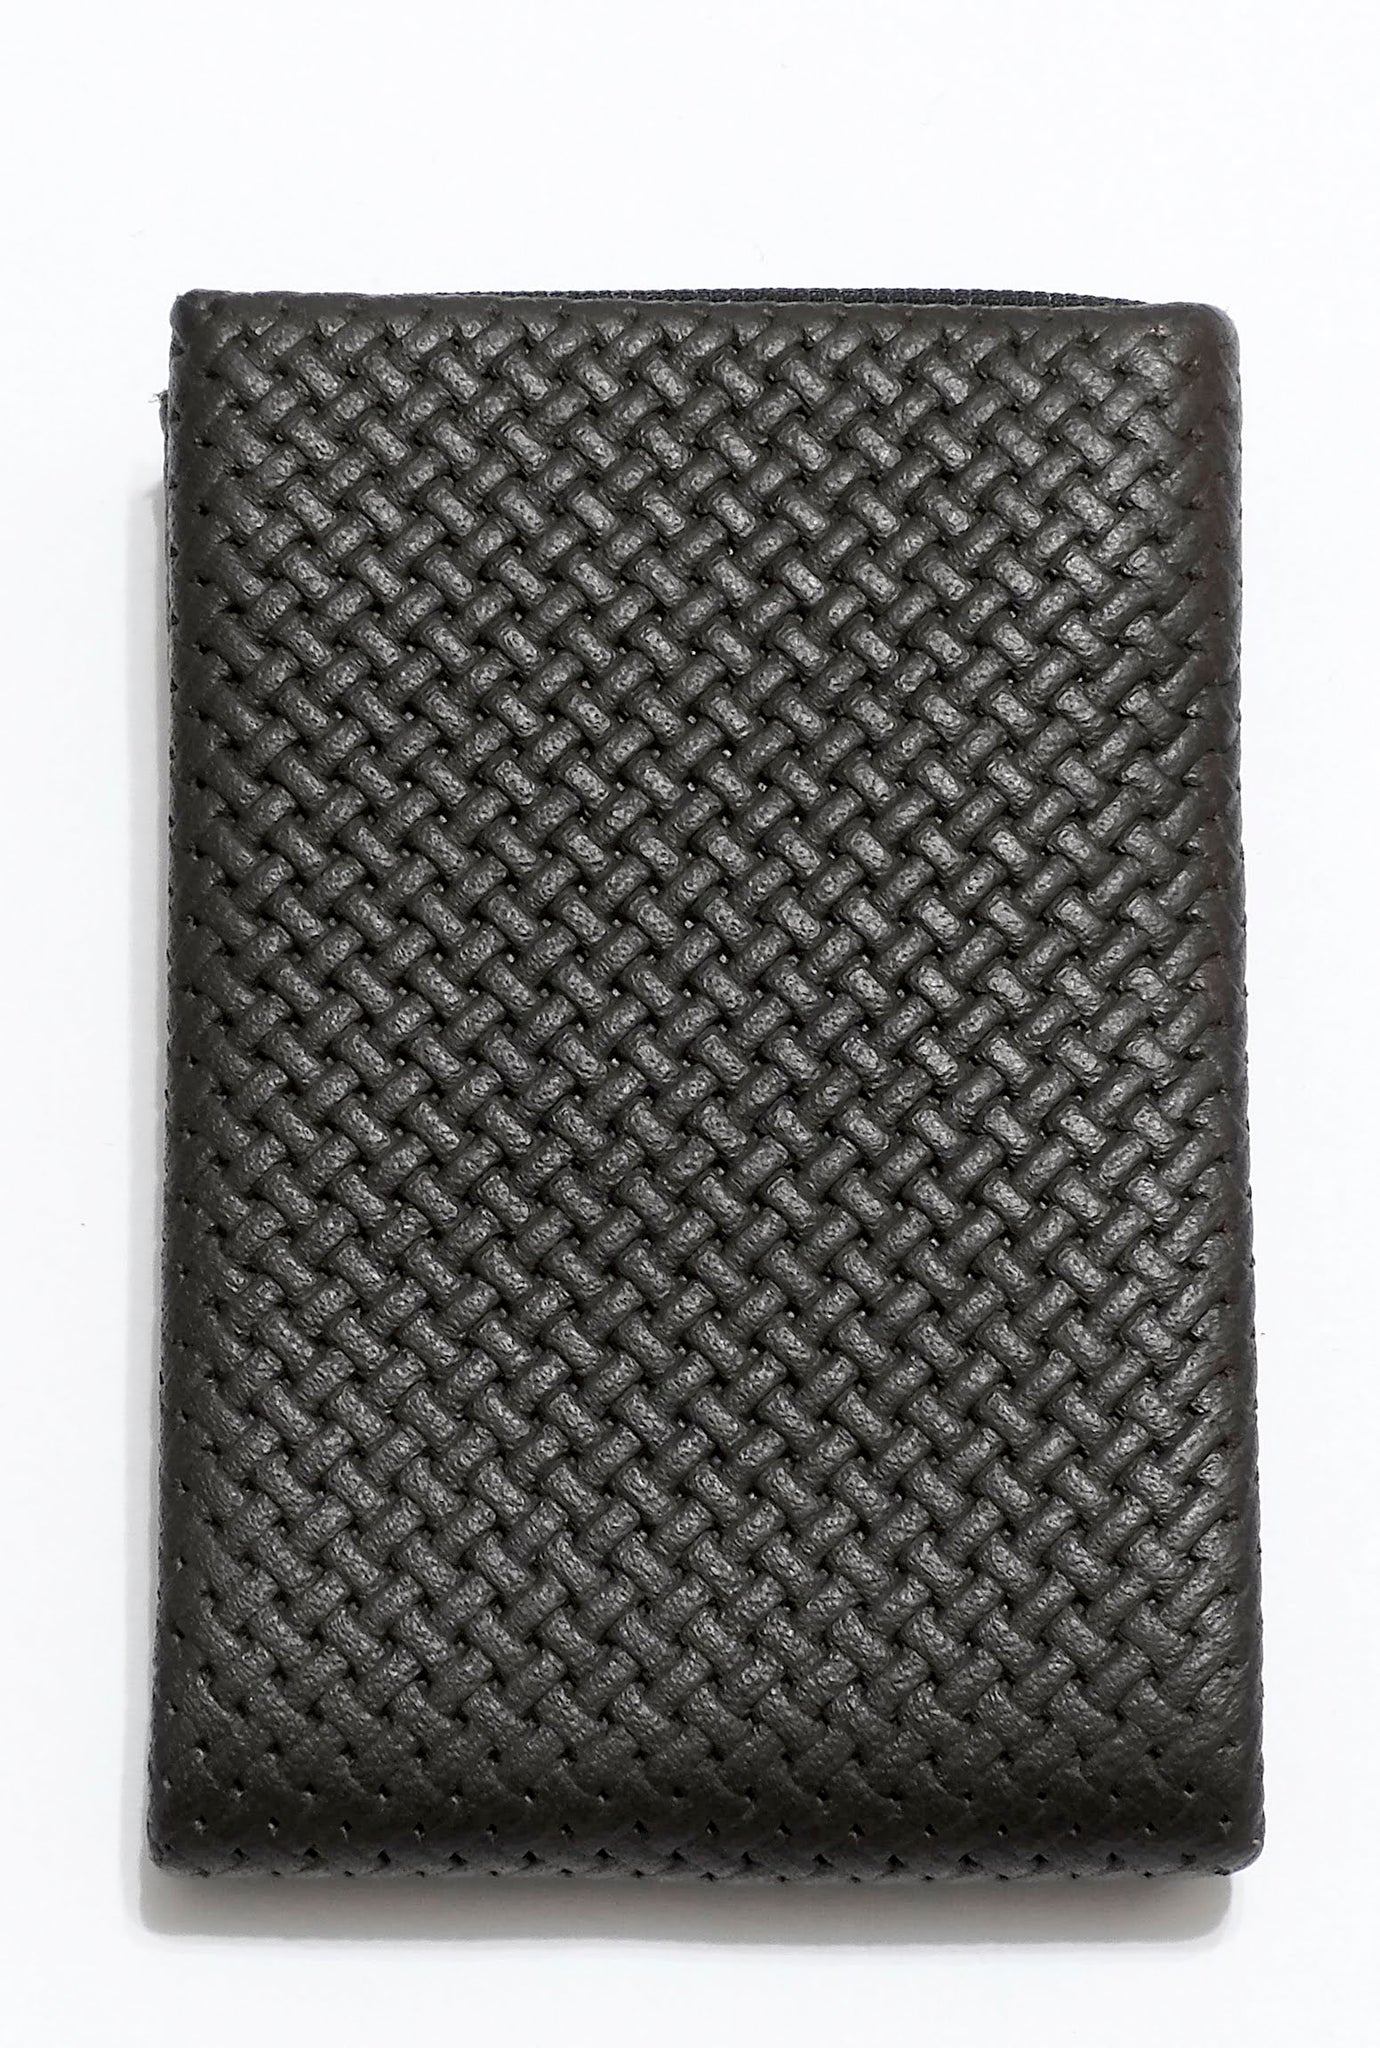 Nero Wallet - Minimalist Wallets for Maximum Style and Functionality ...